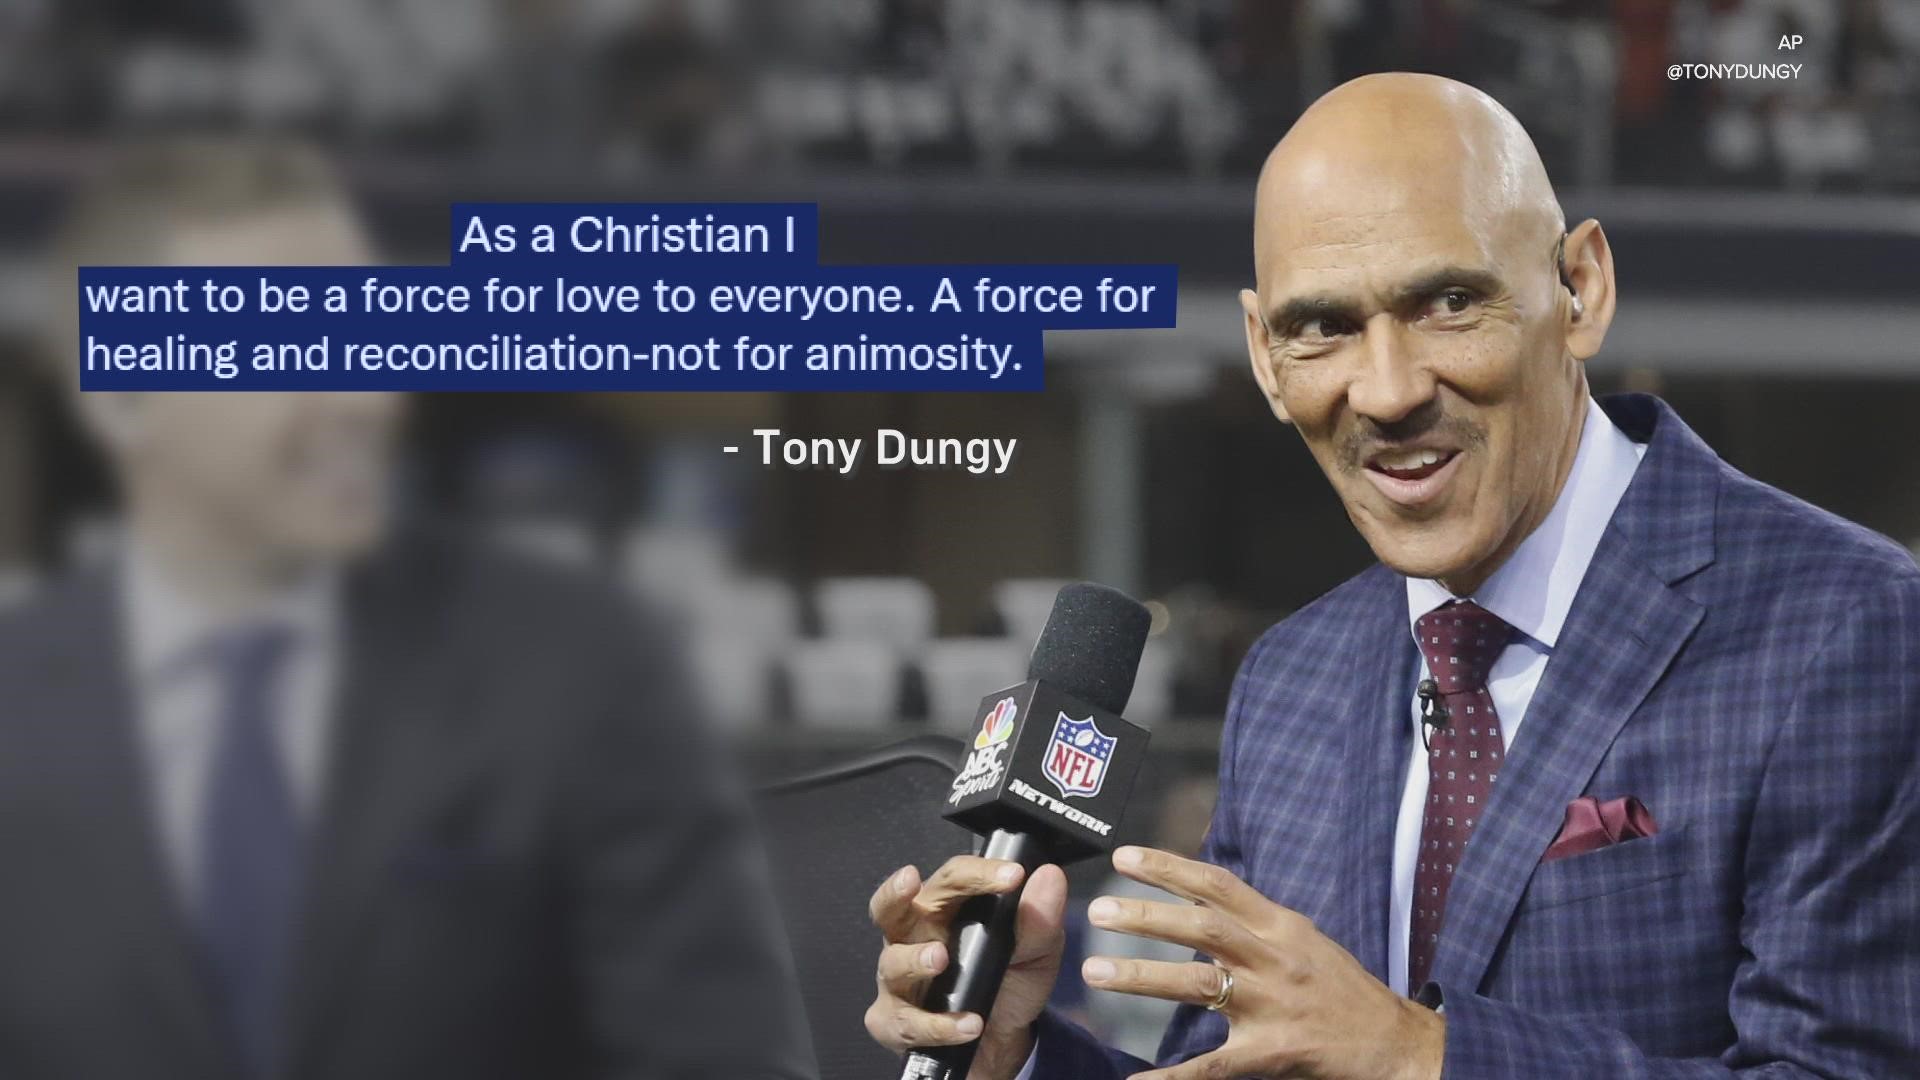 Tony Dungy apologizes for now-deleted tweet